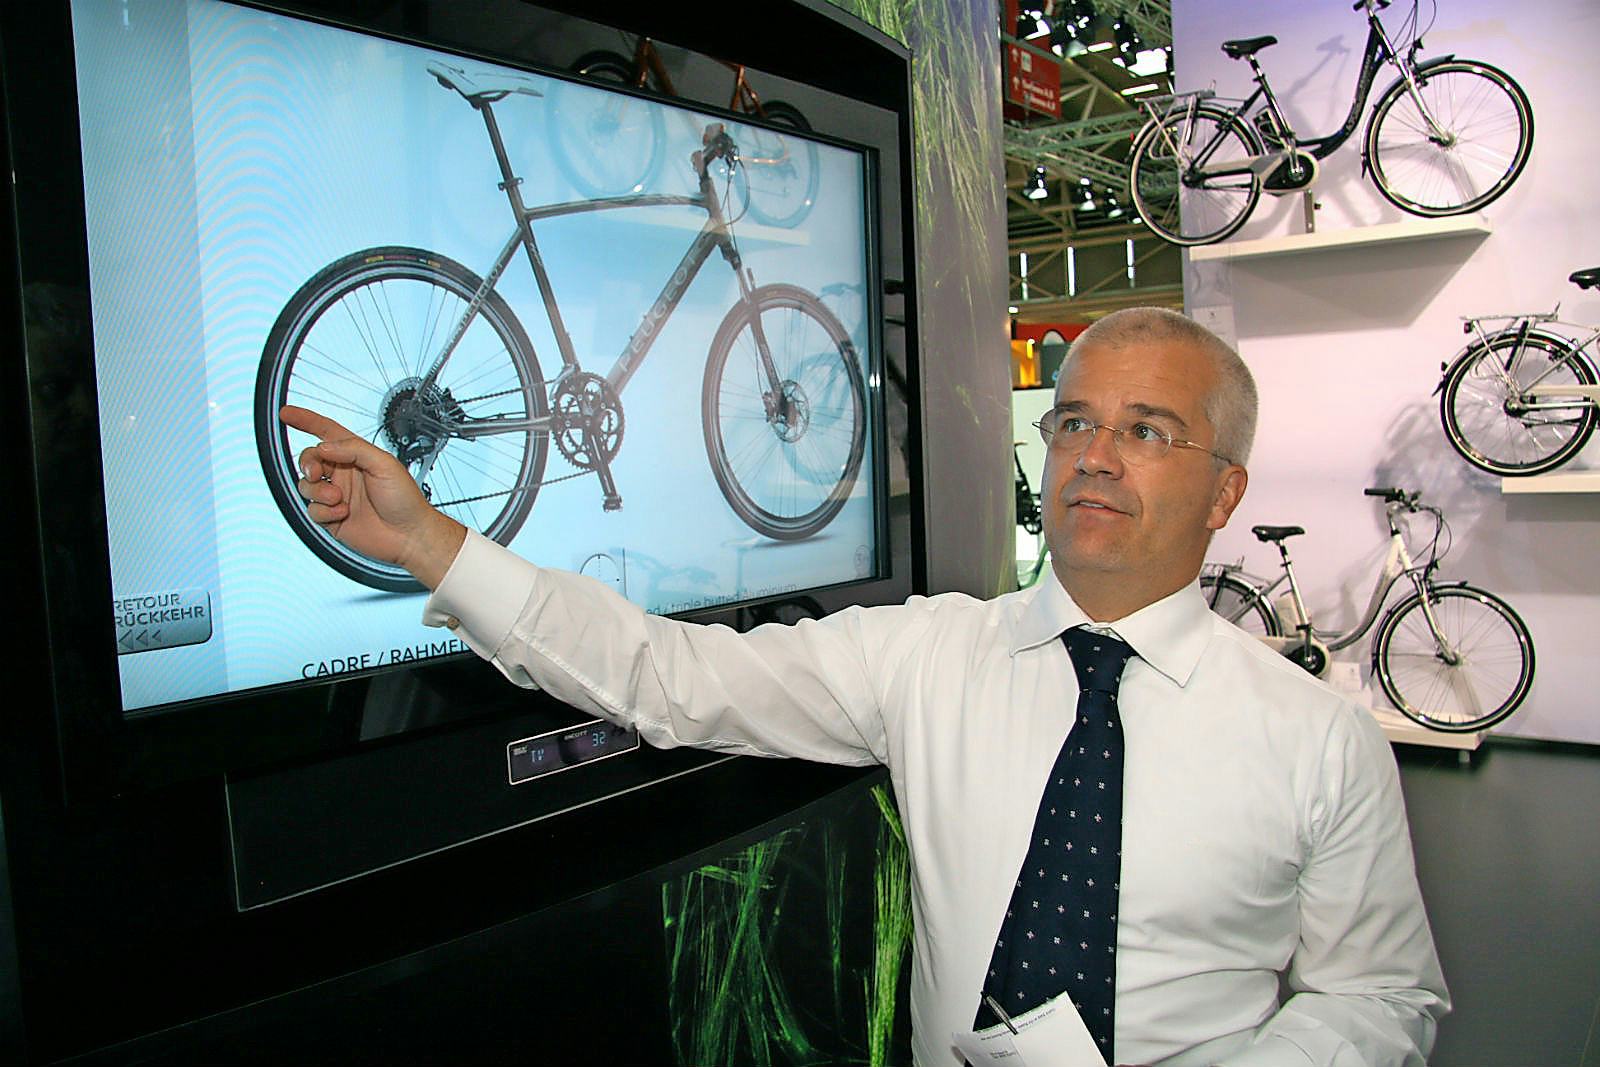 “I think every European cycling company should join the club in order to increase the importance of the bicycle in cities of the future”, said Cycleurope CEO Tony Grimaldi. – Photo ECF